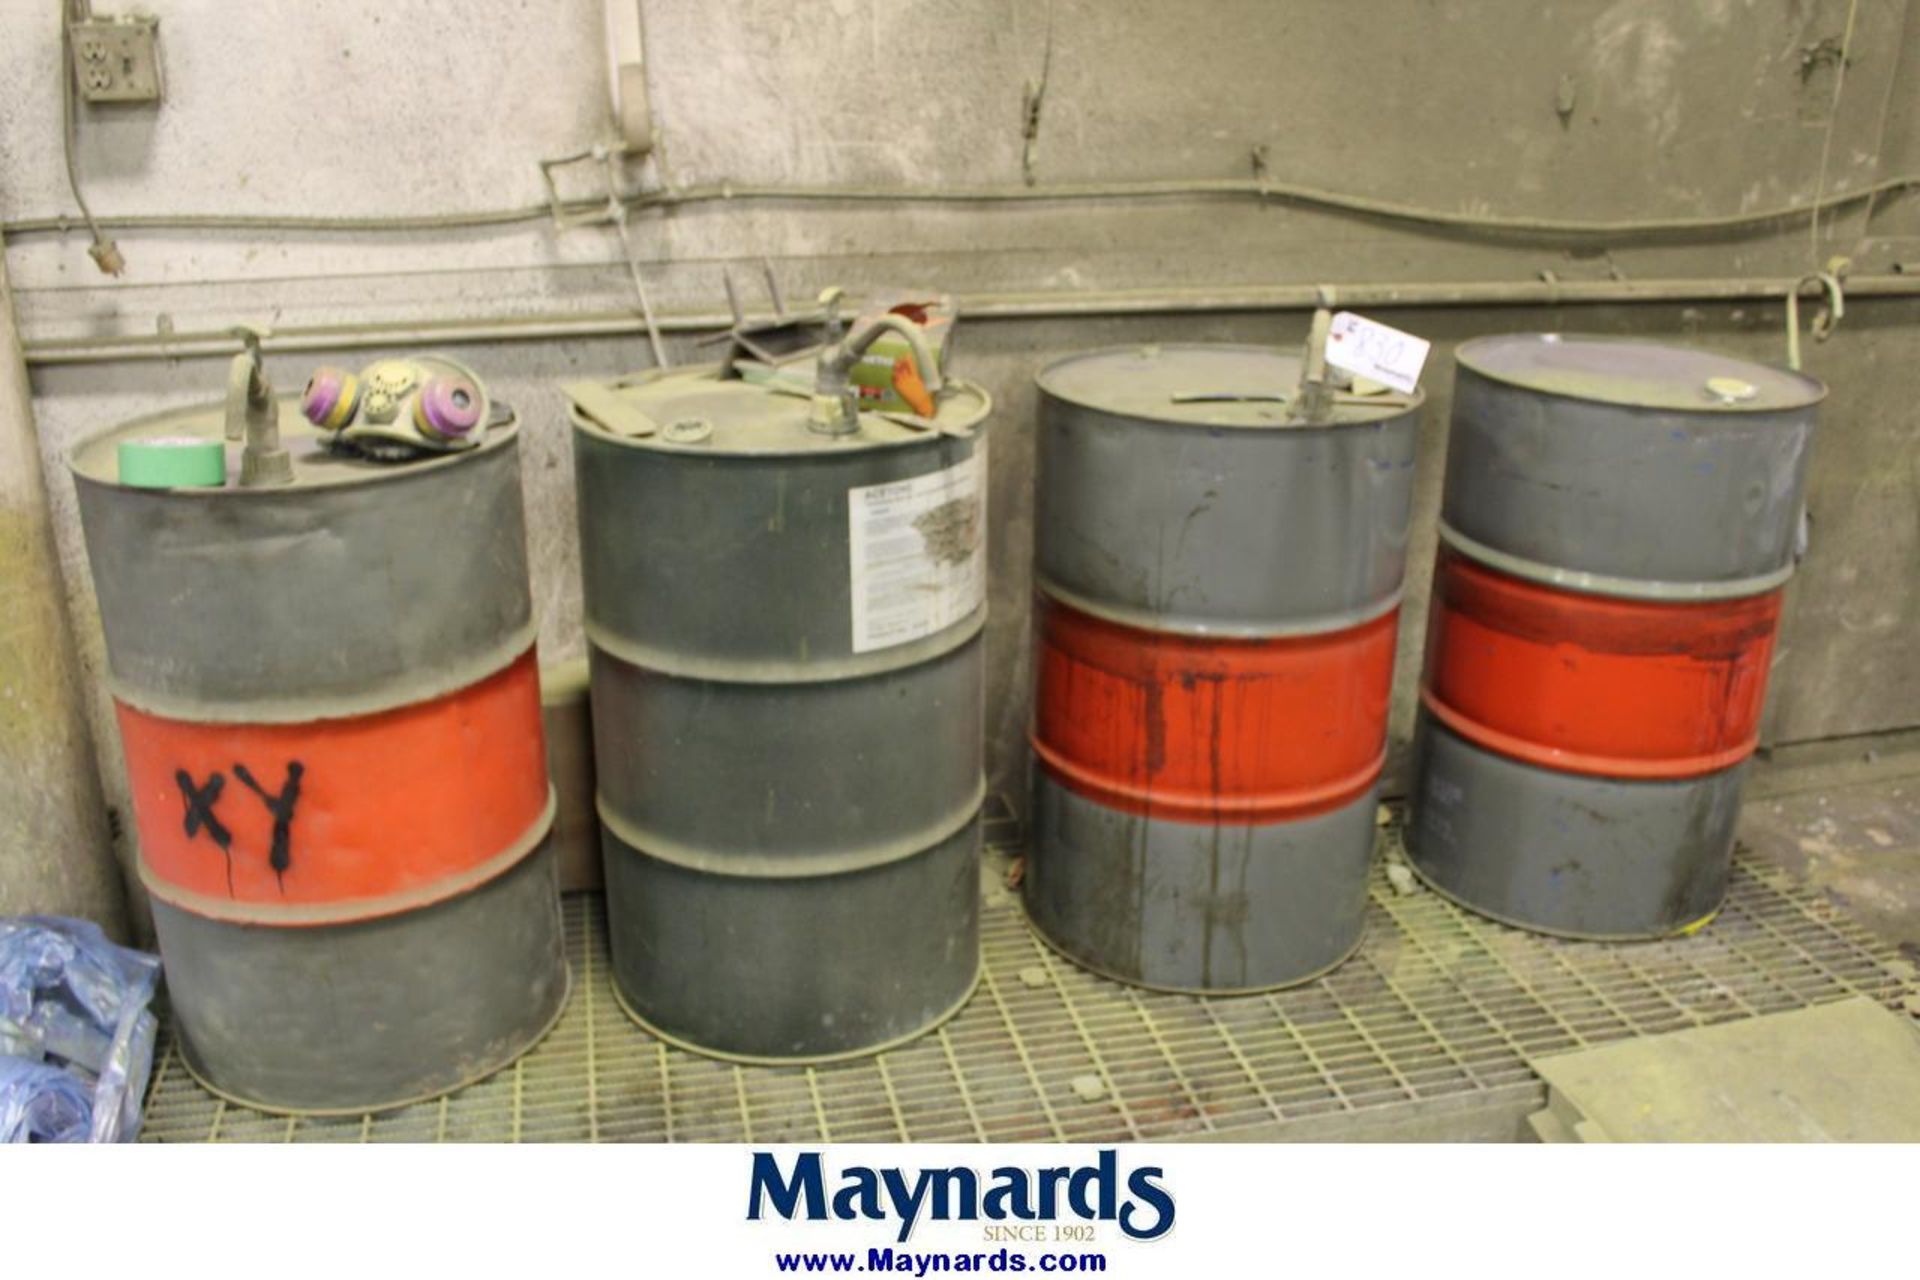 (4) 55 gallon drums with acetone